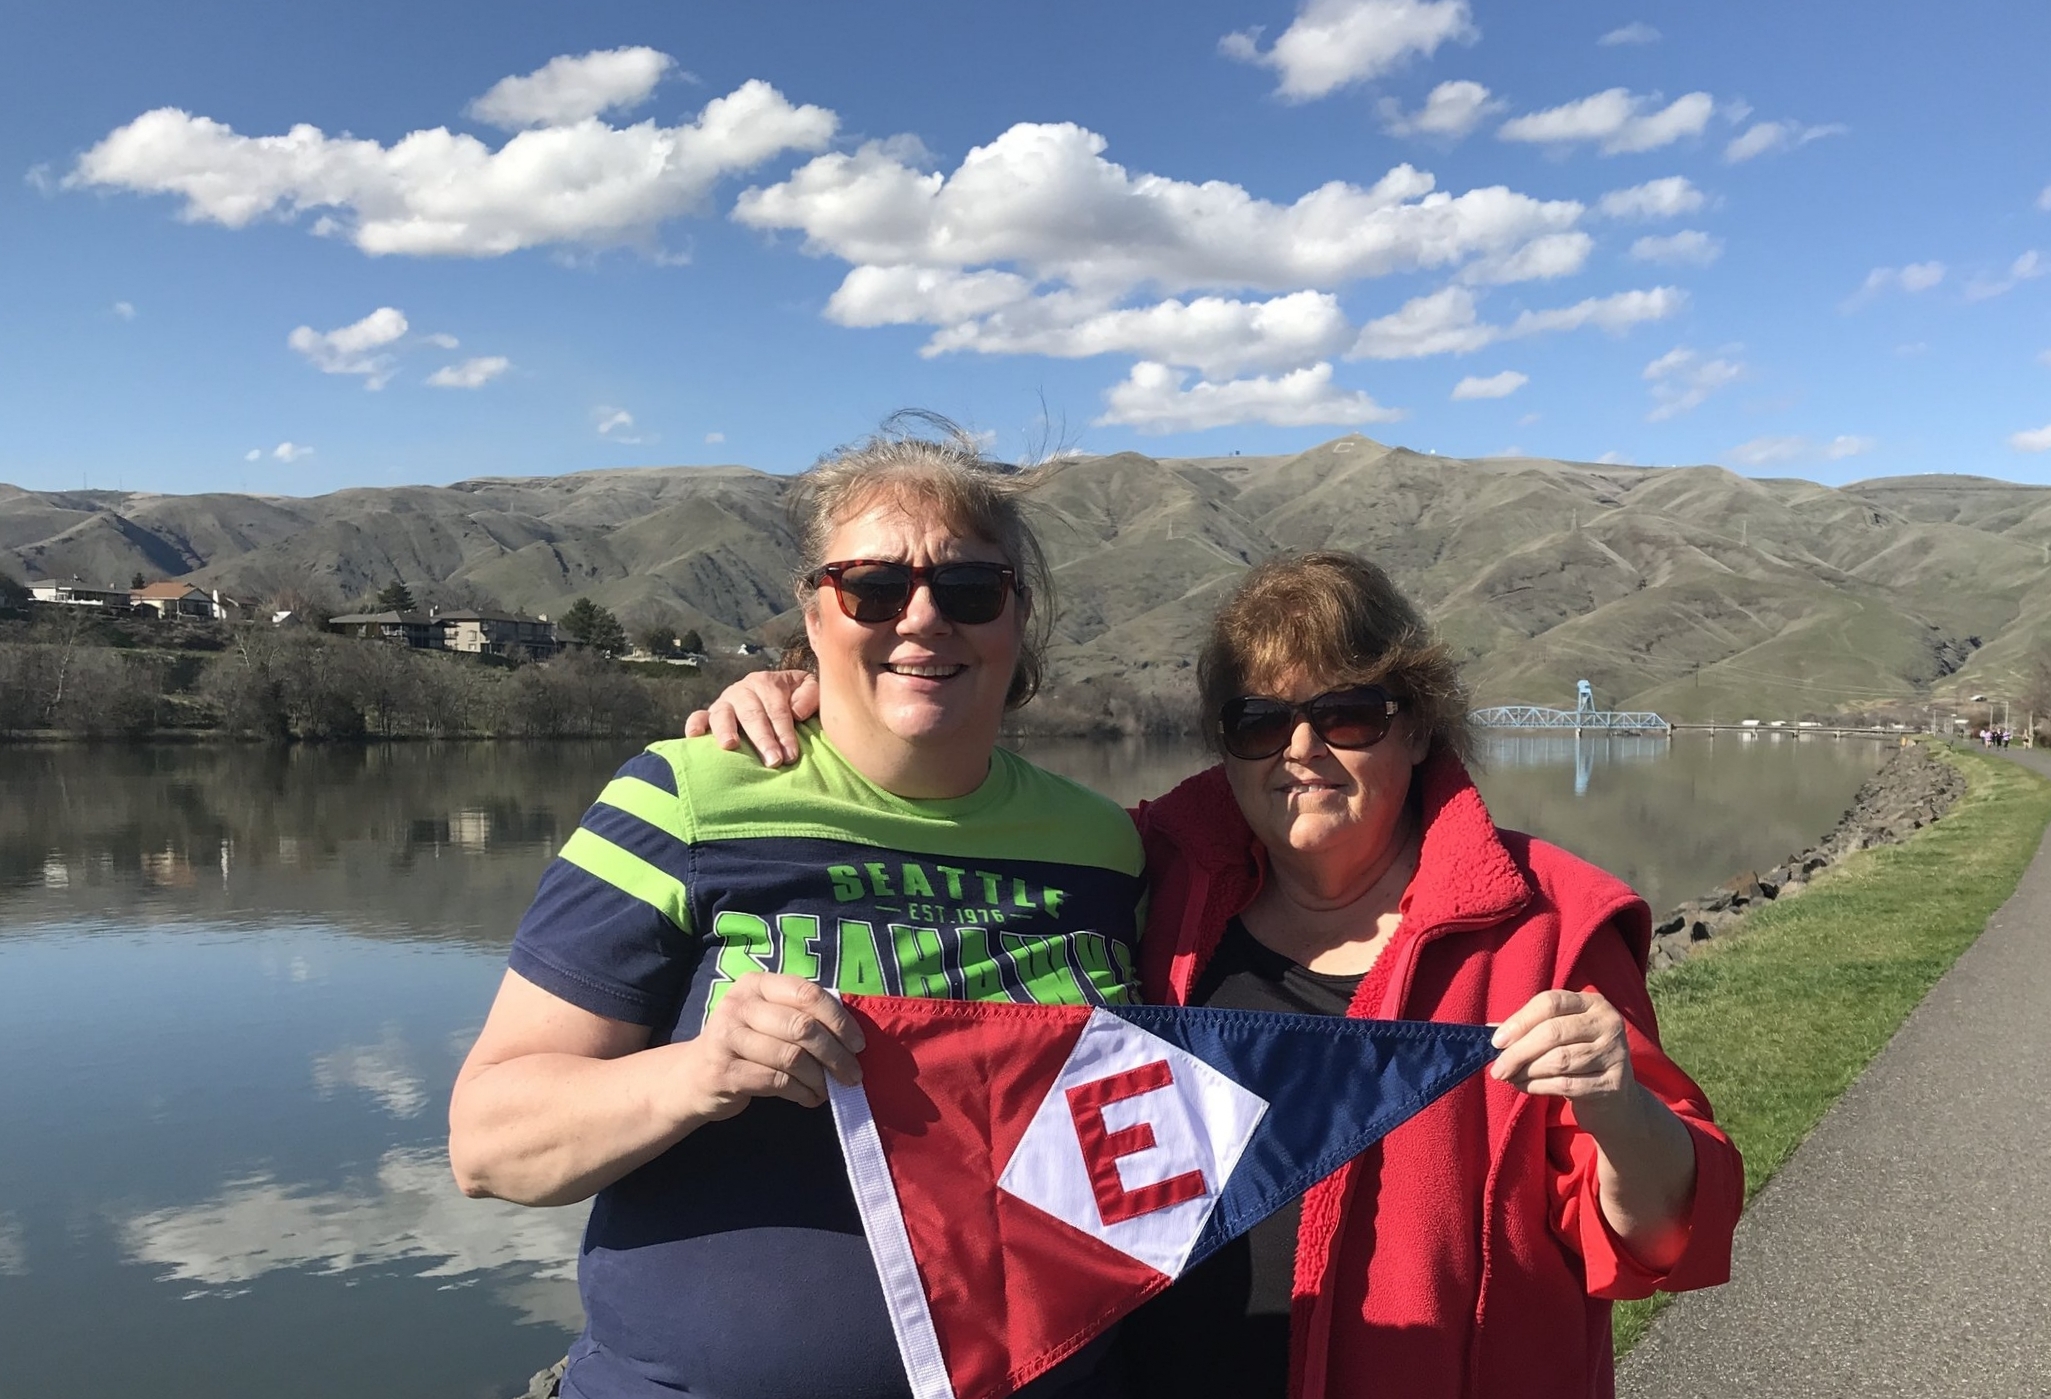  Janet and Leta share their EYC pride at the Snake River in Idaho 